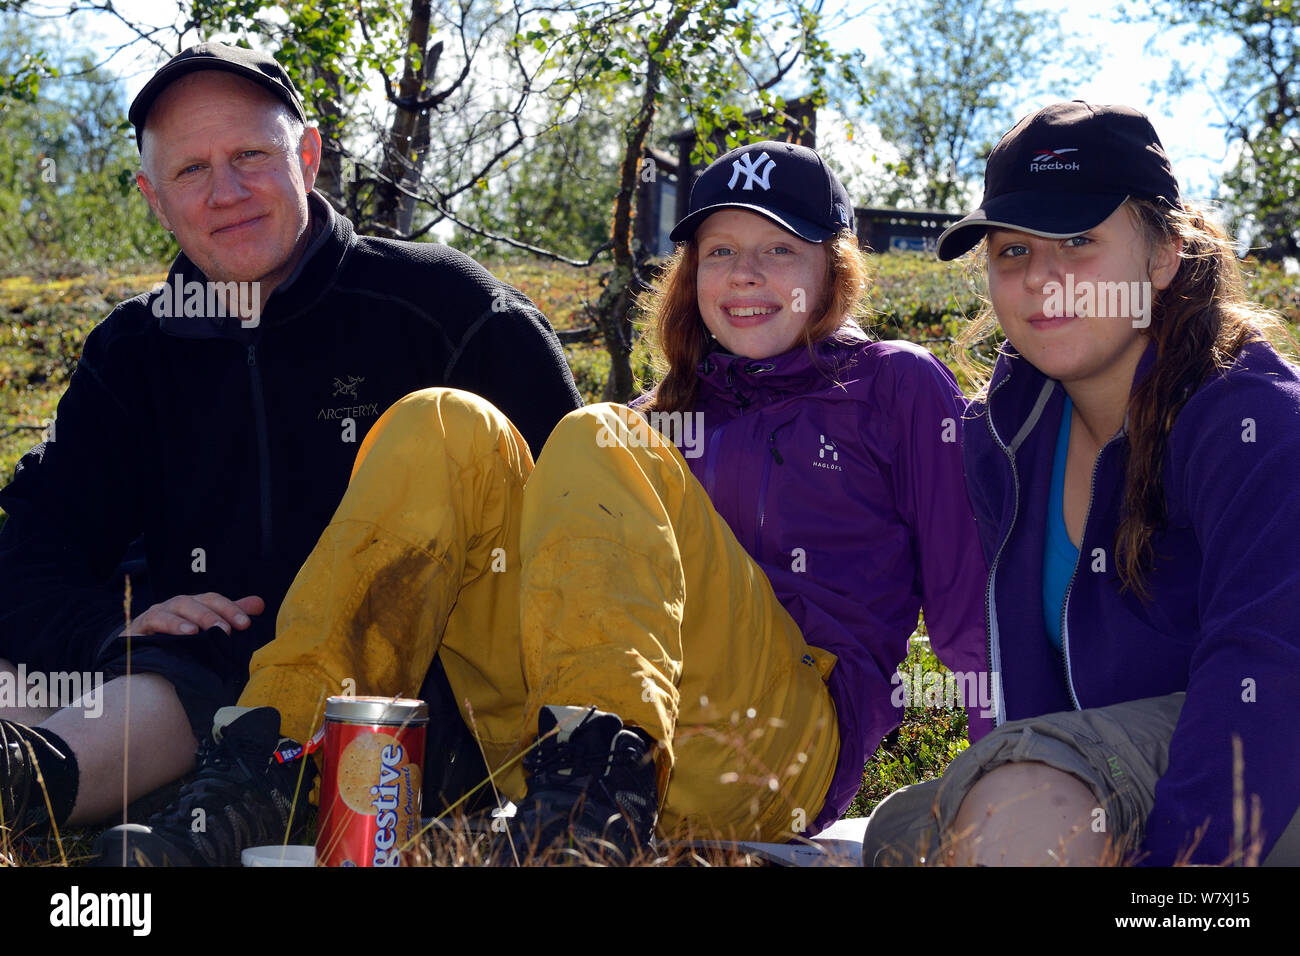 Photographer Staffan Widstrand with Mimmi Widstrand and Julia Mangsaker, opn family hiking trip,  Laponia Circuit, along the Padjelantaleden trail, Padjelanta National Park and Sarek National Park, Norrbotten, Lapland, Sweden. Model released Stock Photo